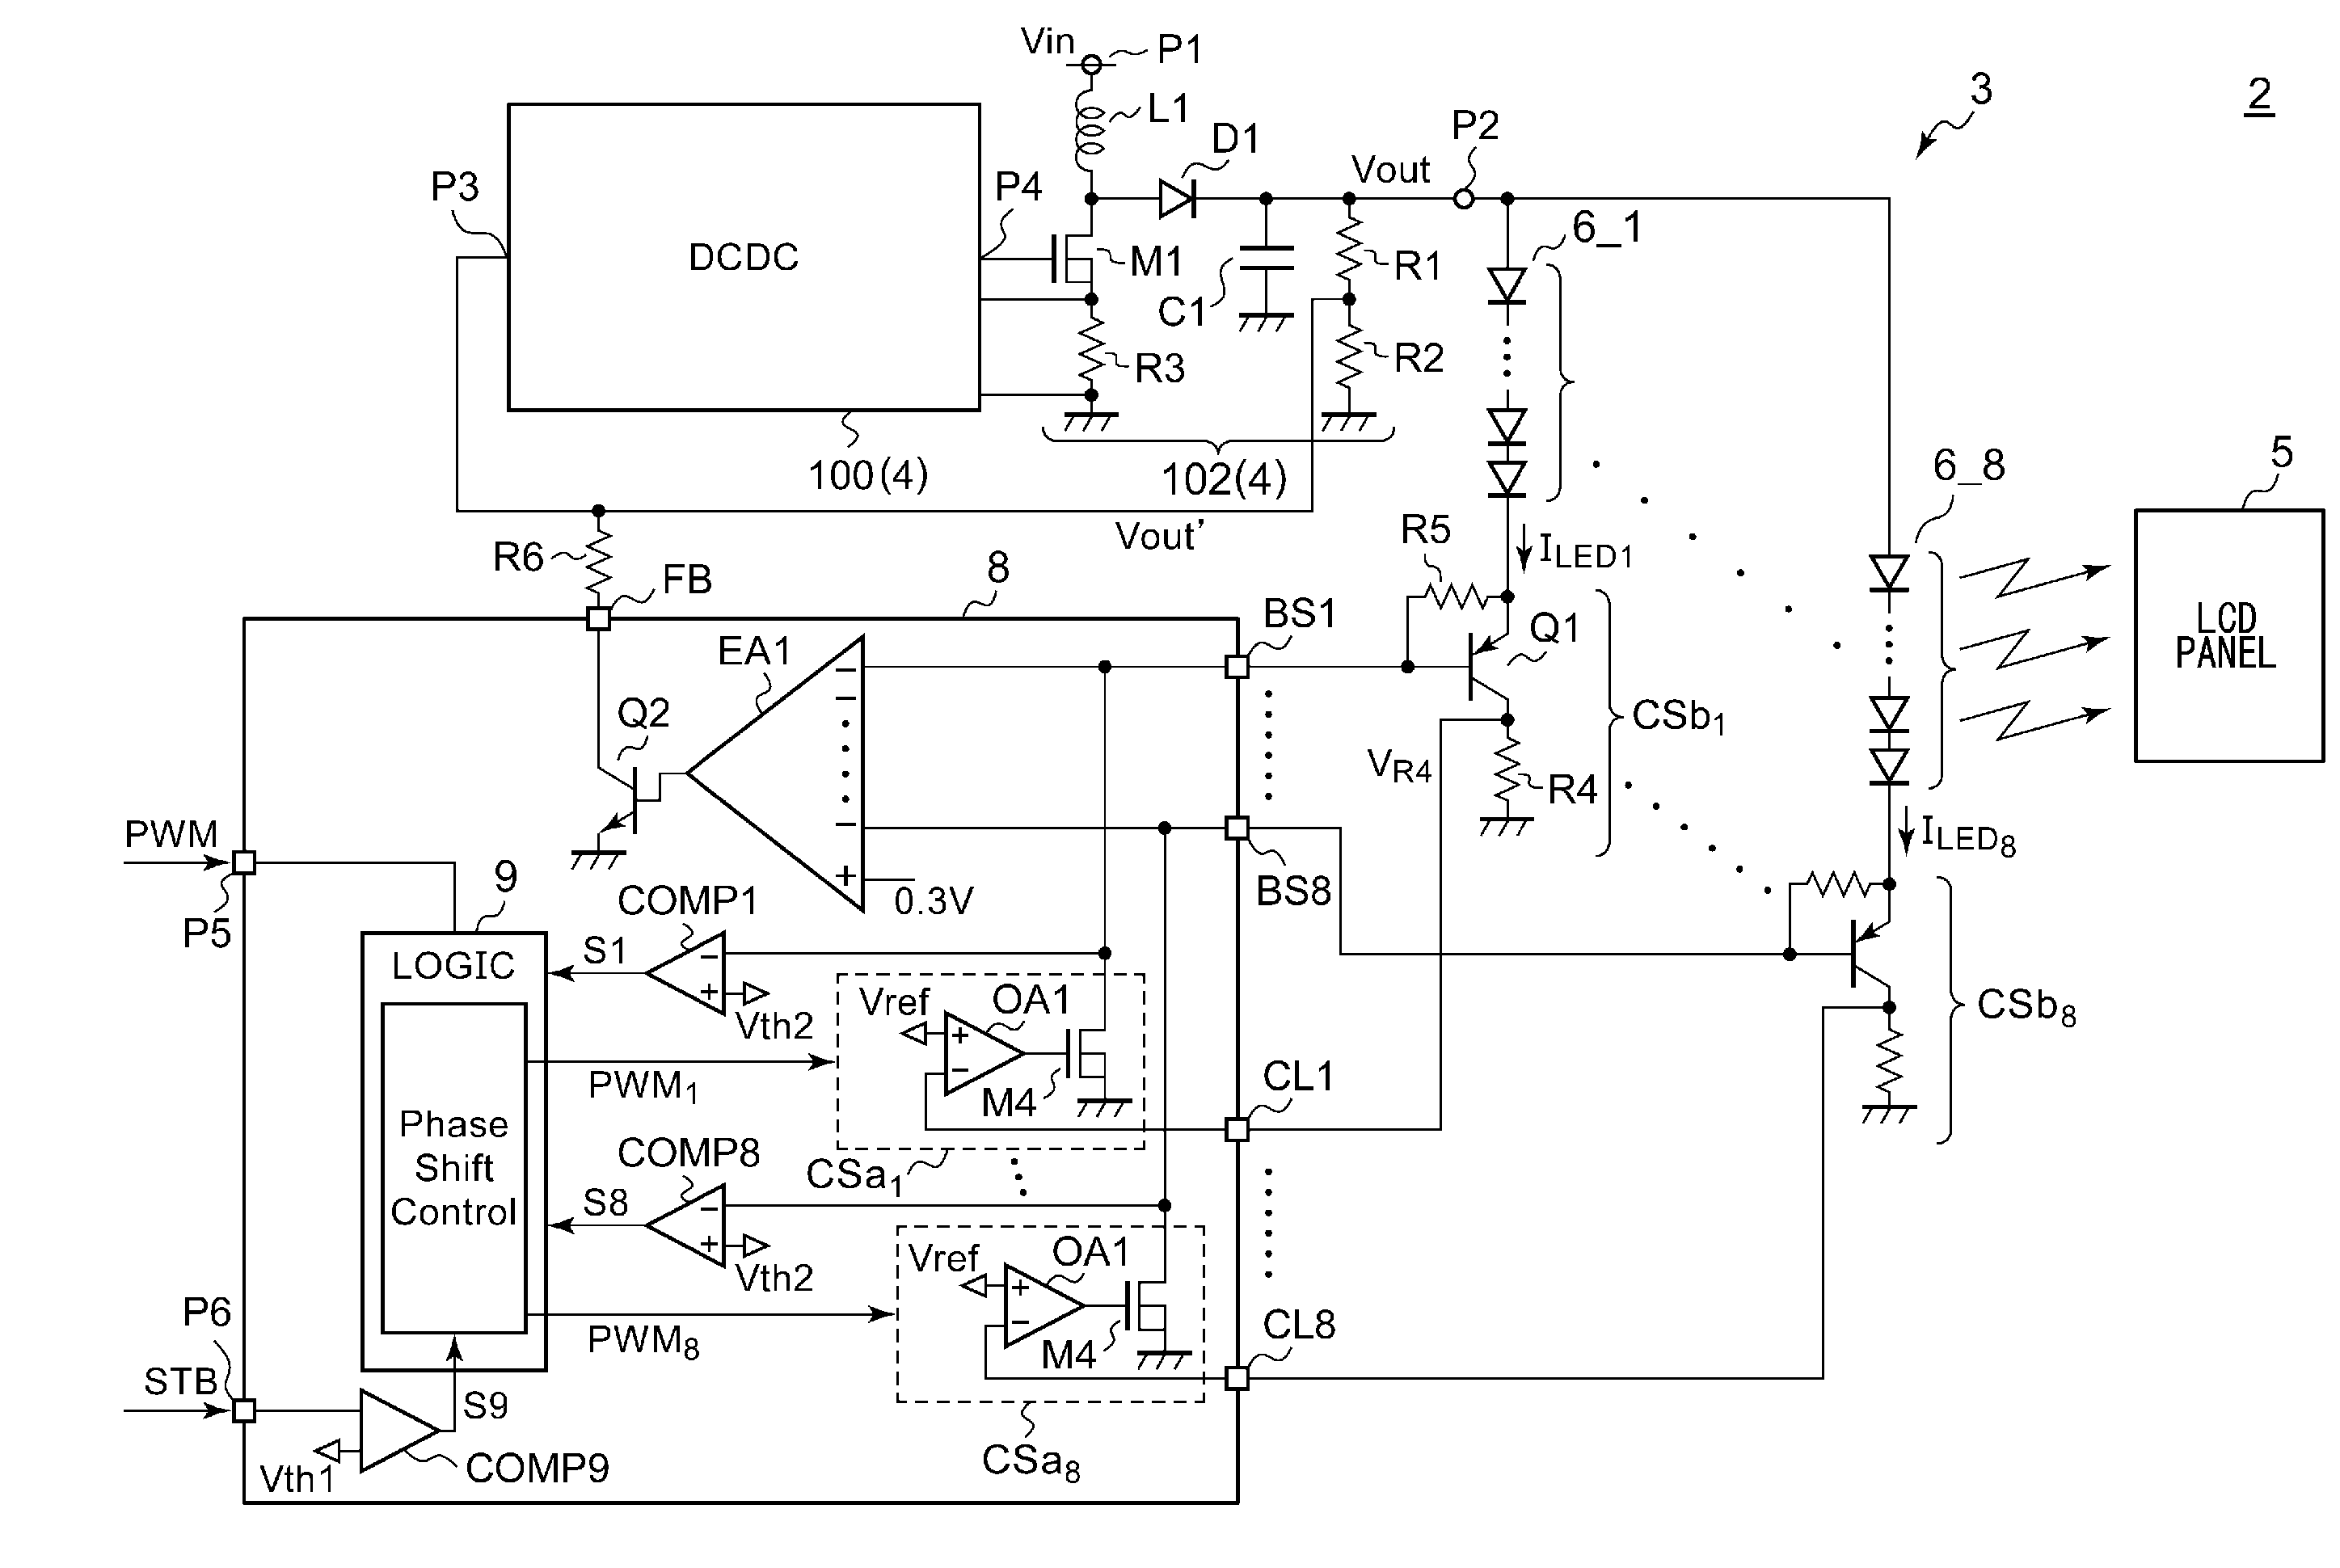 Phase shift controller